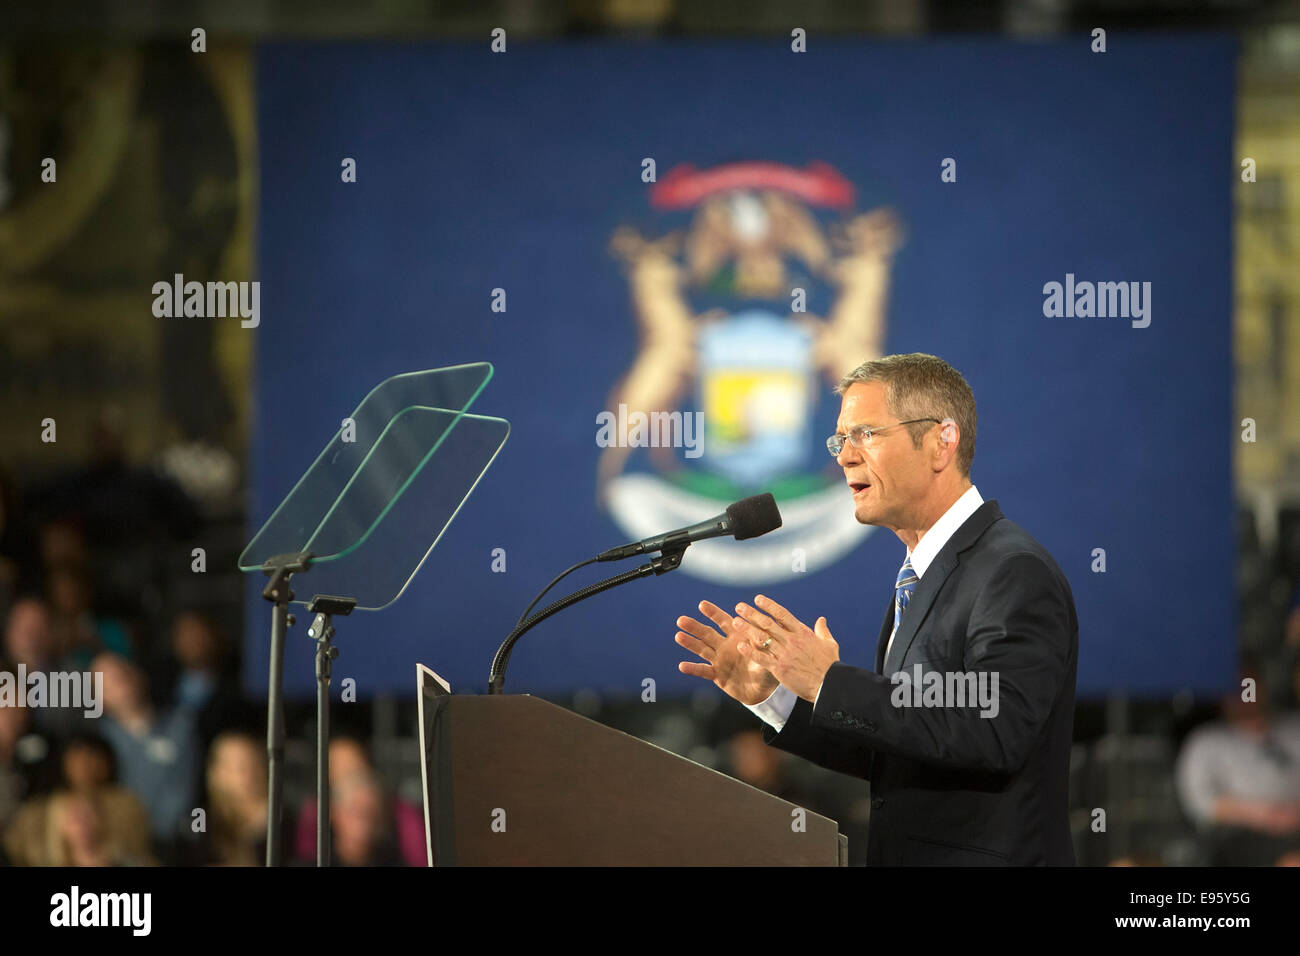 Rochester, Michigan - Mark Schauer, the Democratic candidate for Michigan governor, speaks during a campaign rally. Stock Photo